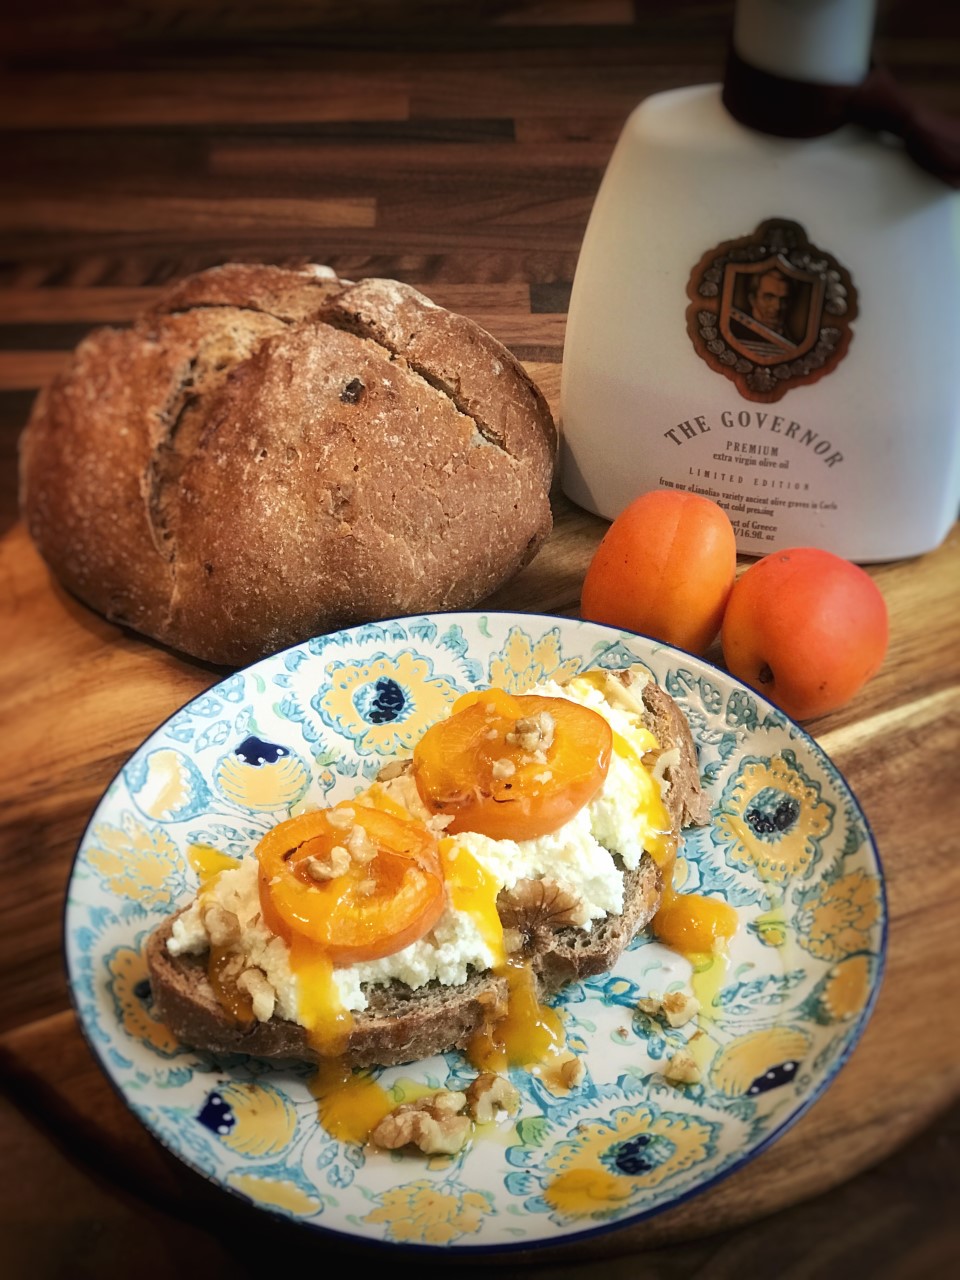 Whipped feta and apricot toast with walnuts and a honey, apricot drizzle